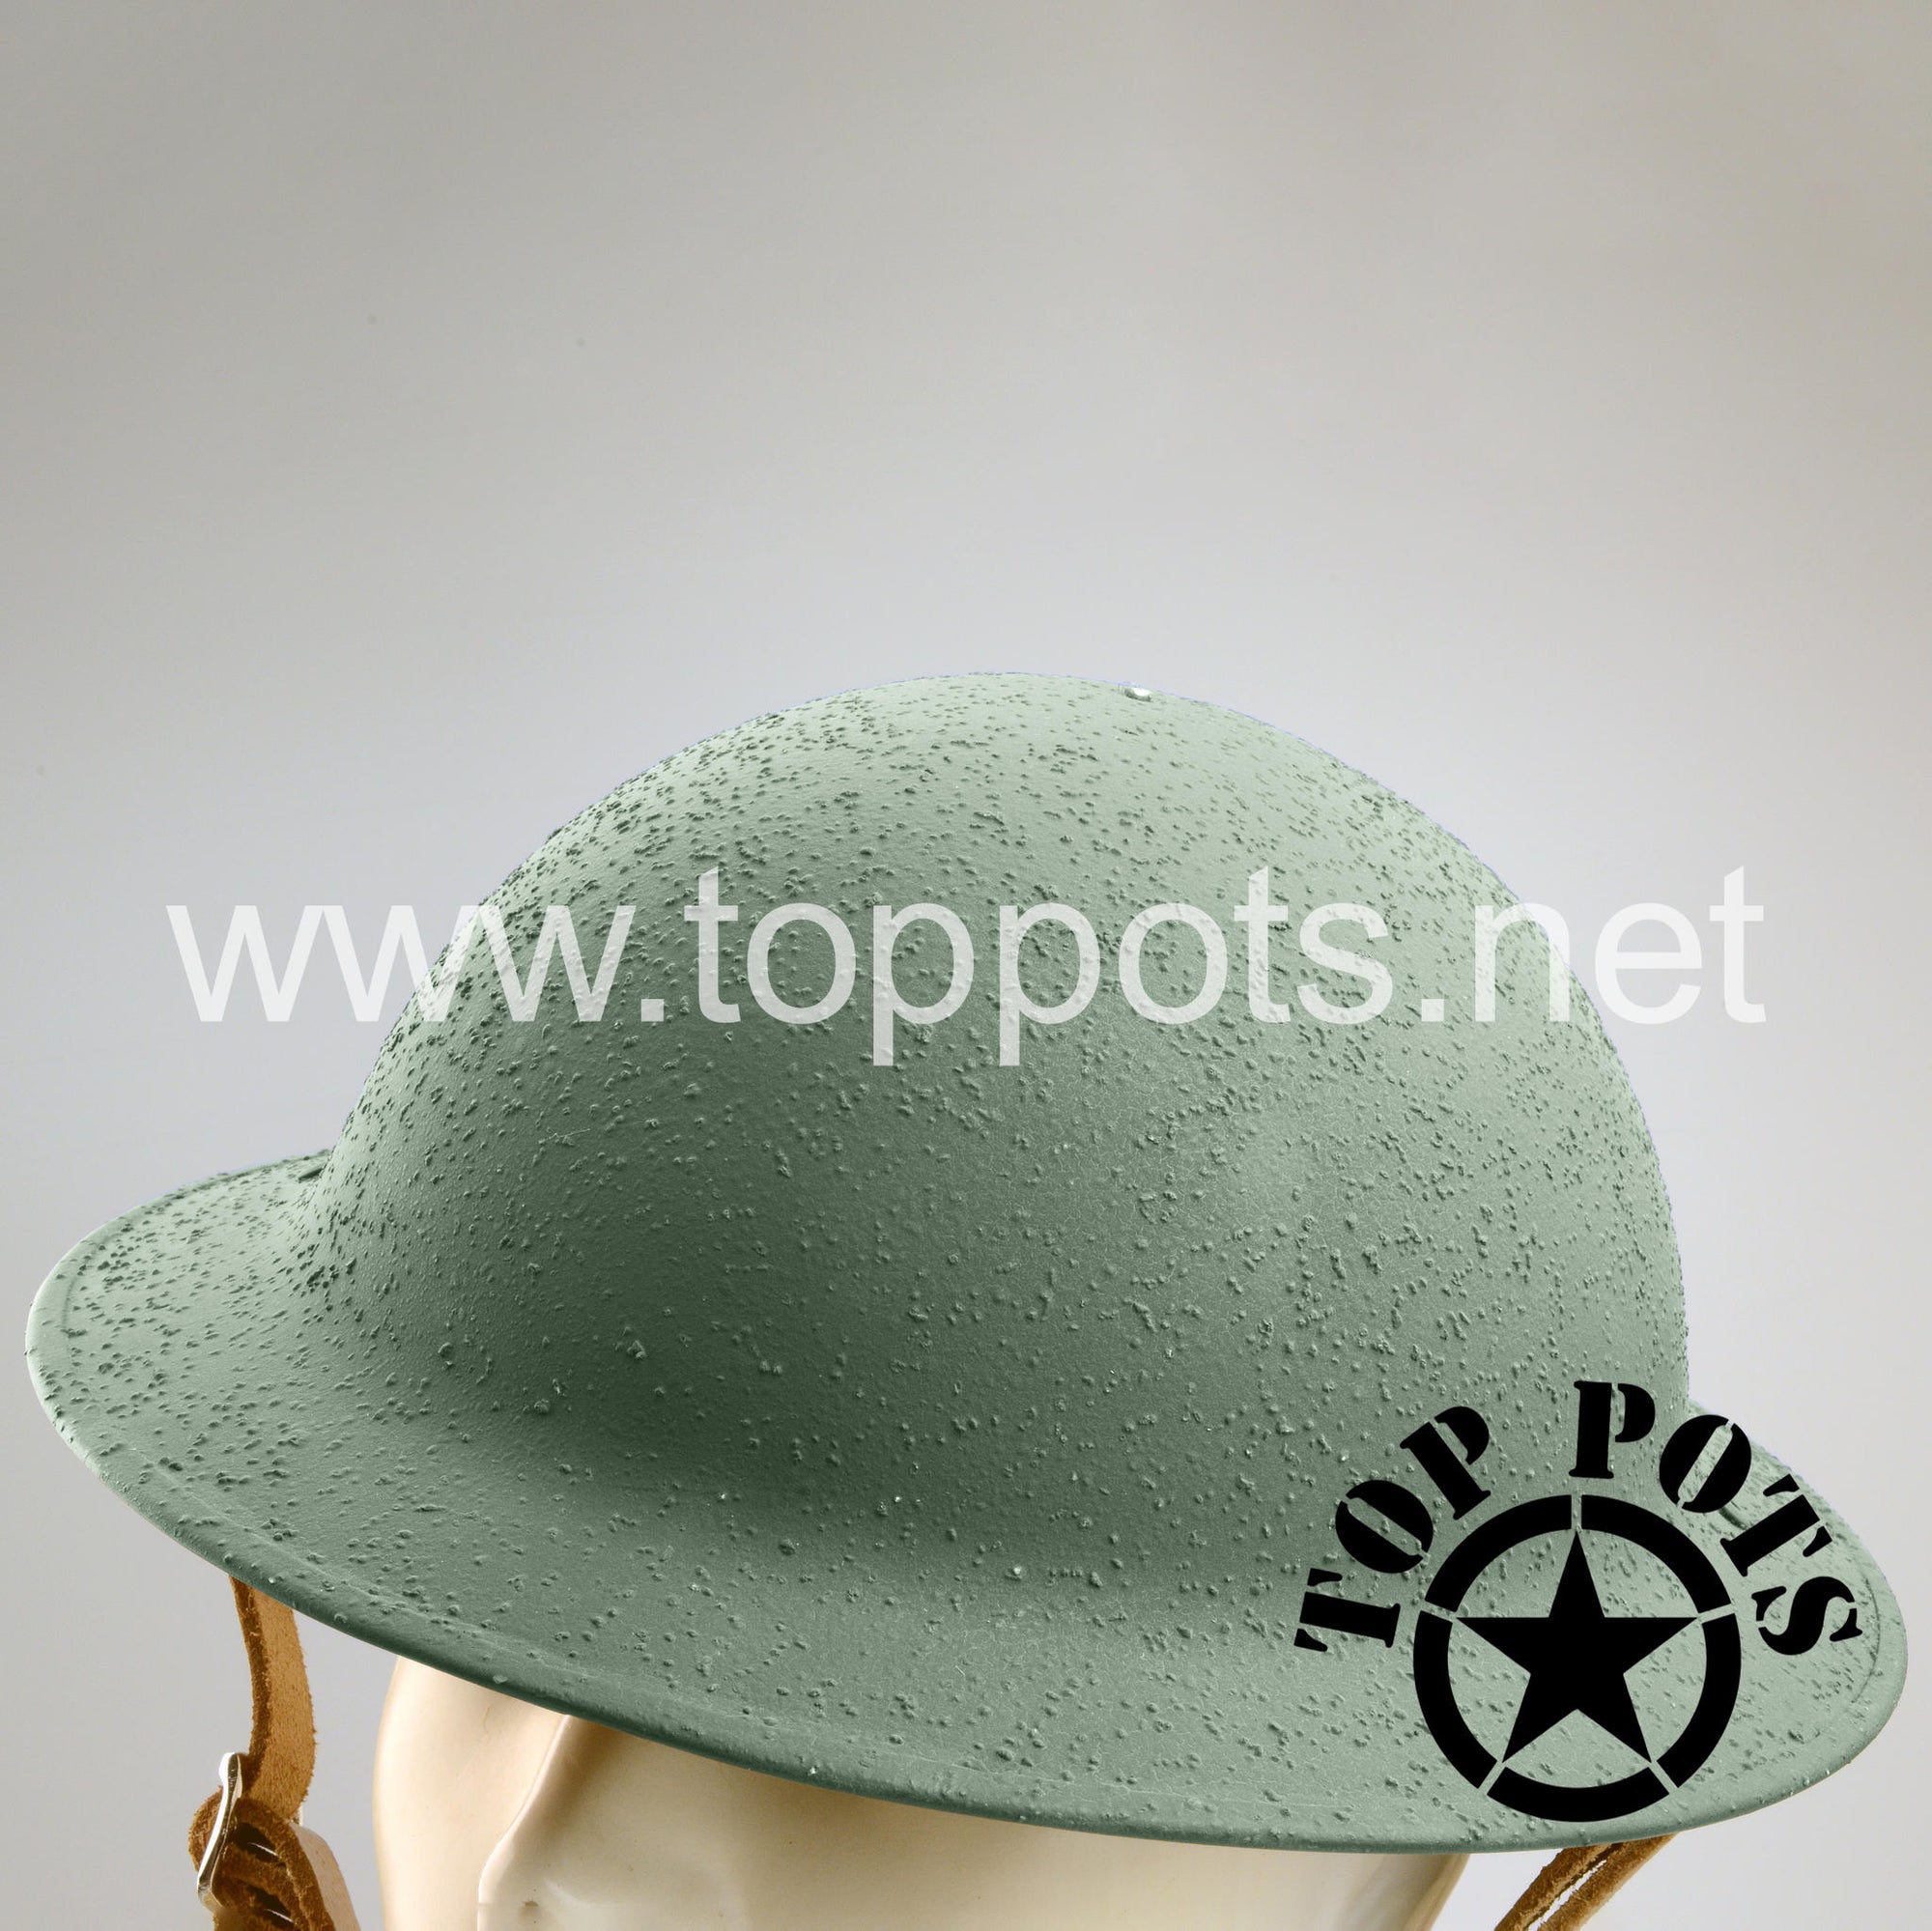 WWI Australian Army Reproduction M1916 MKI Enlisted Brodie Helmet with Burlap Cover – Textured Finish